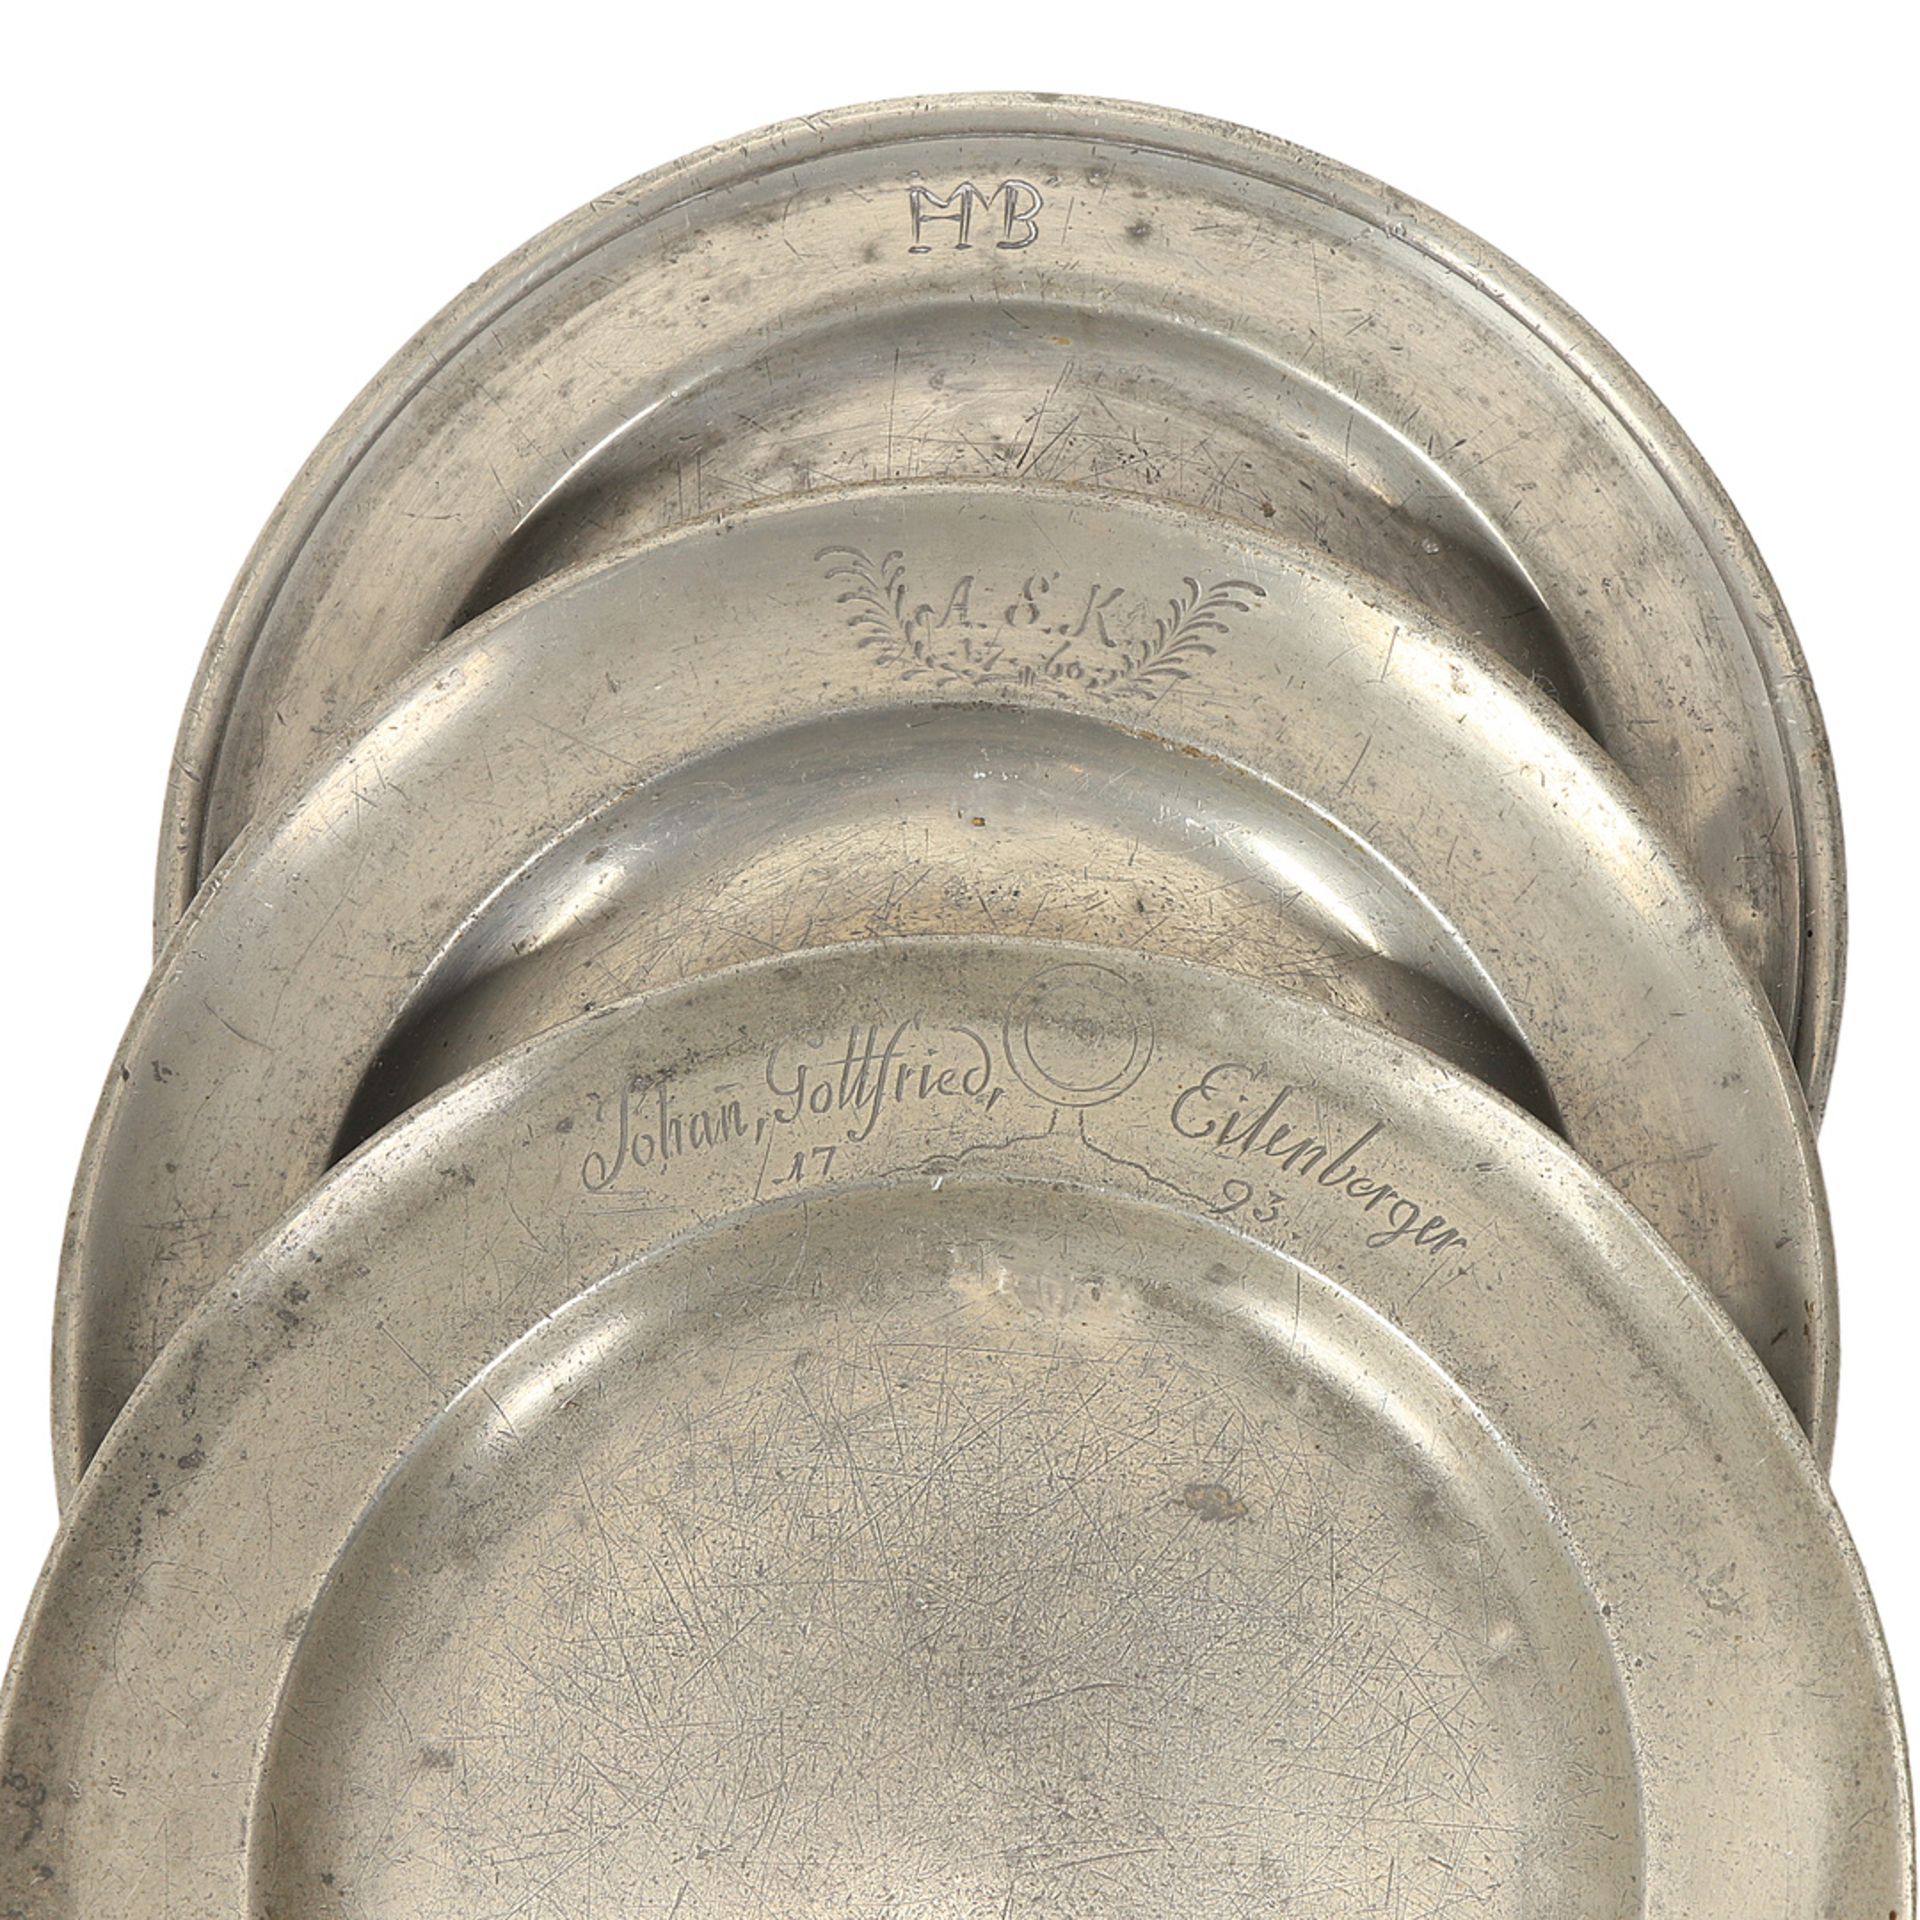 Small collection of pewter, Germany / France, 18th/19th century - Image 4 of 4